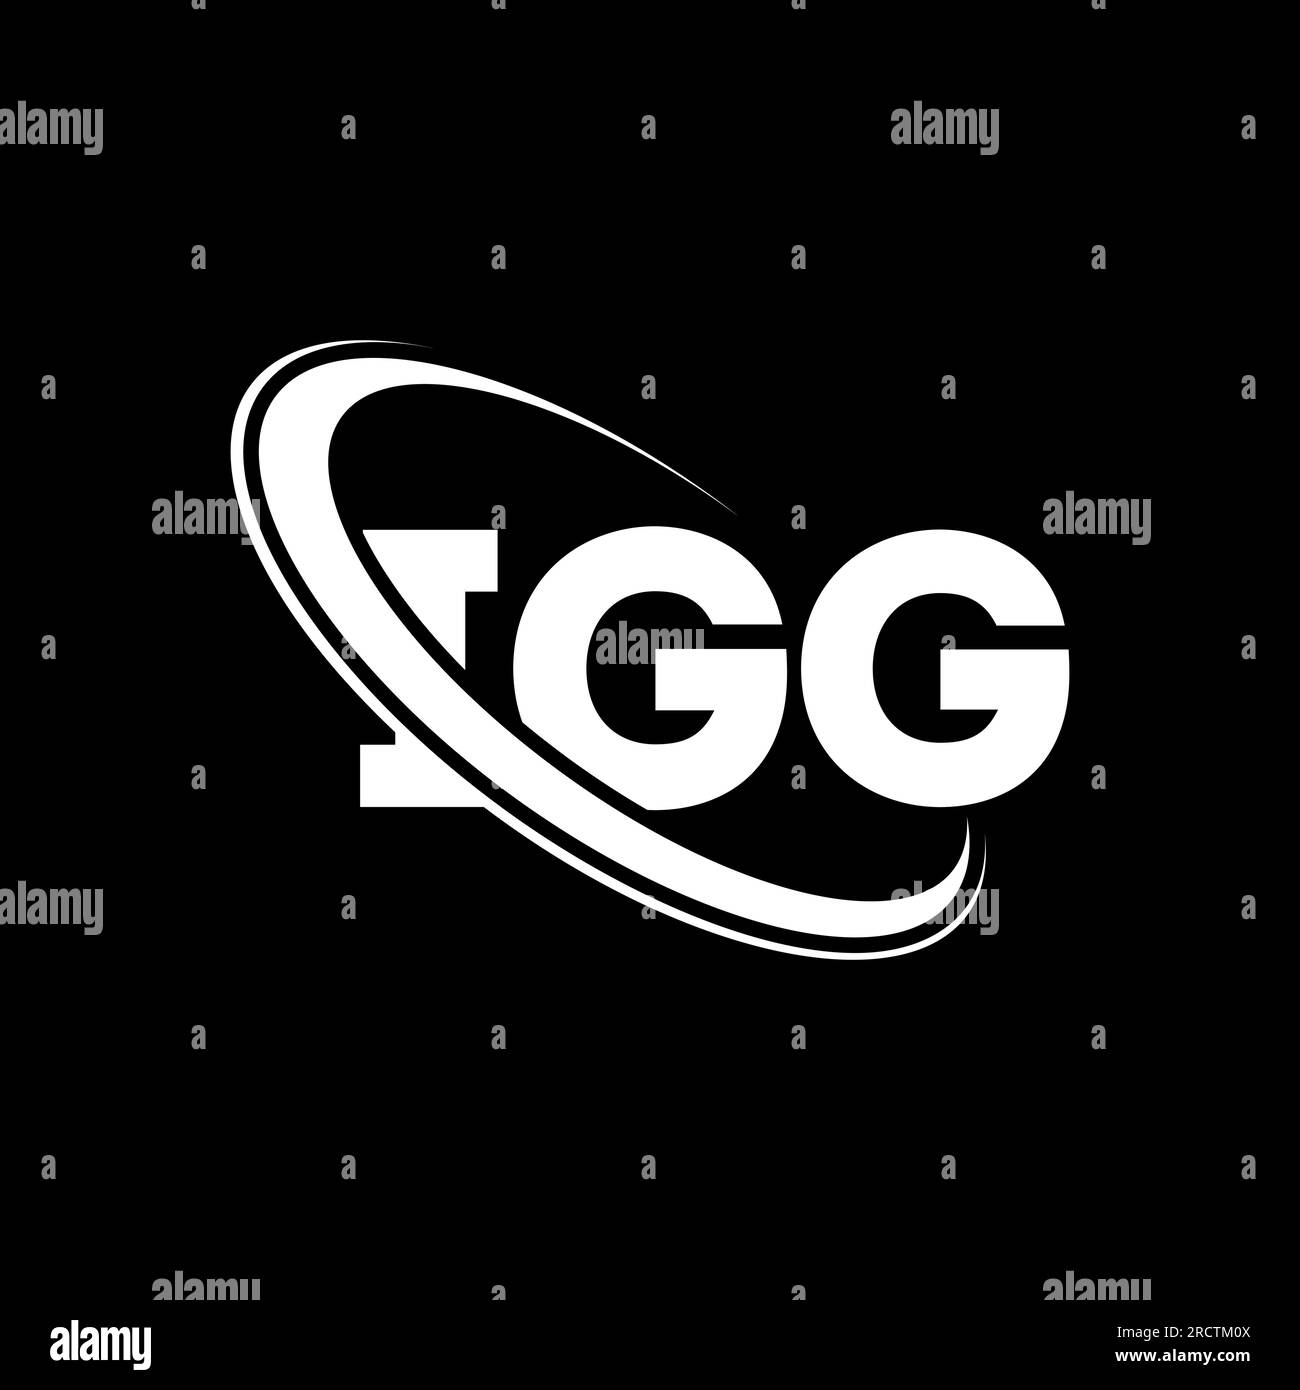 Igg Stock Vector Images - Alamy